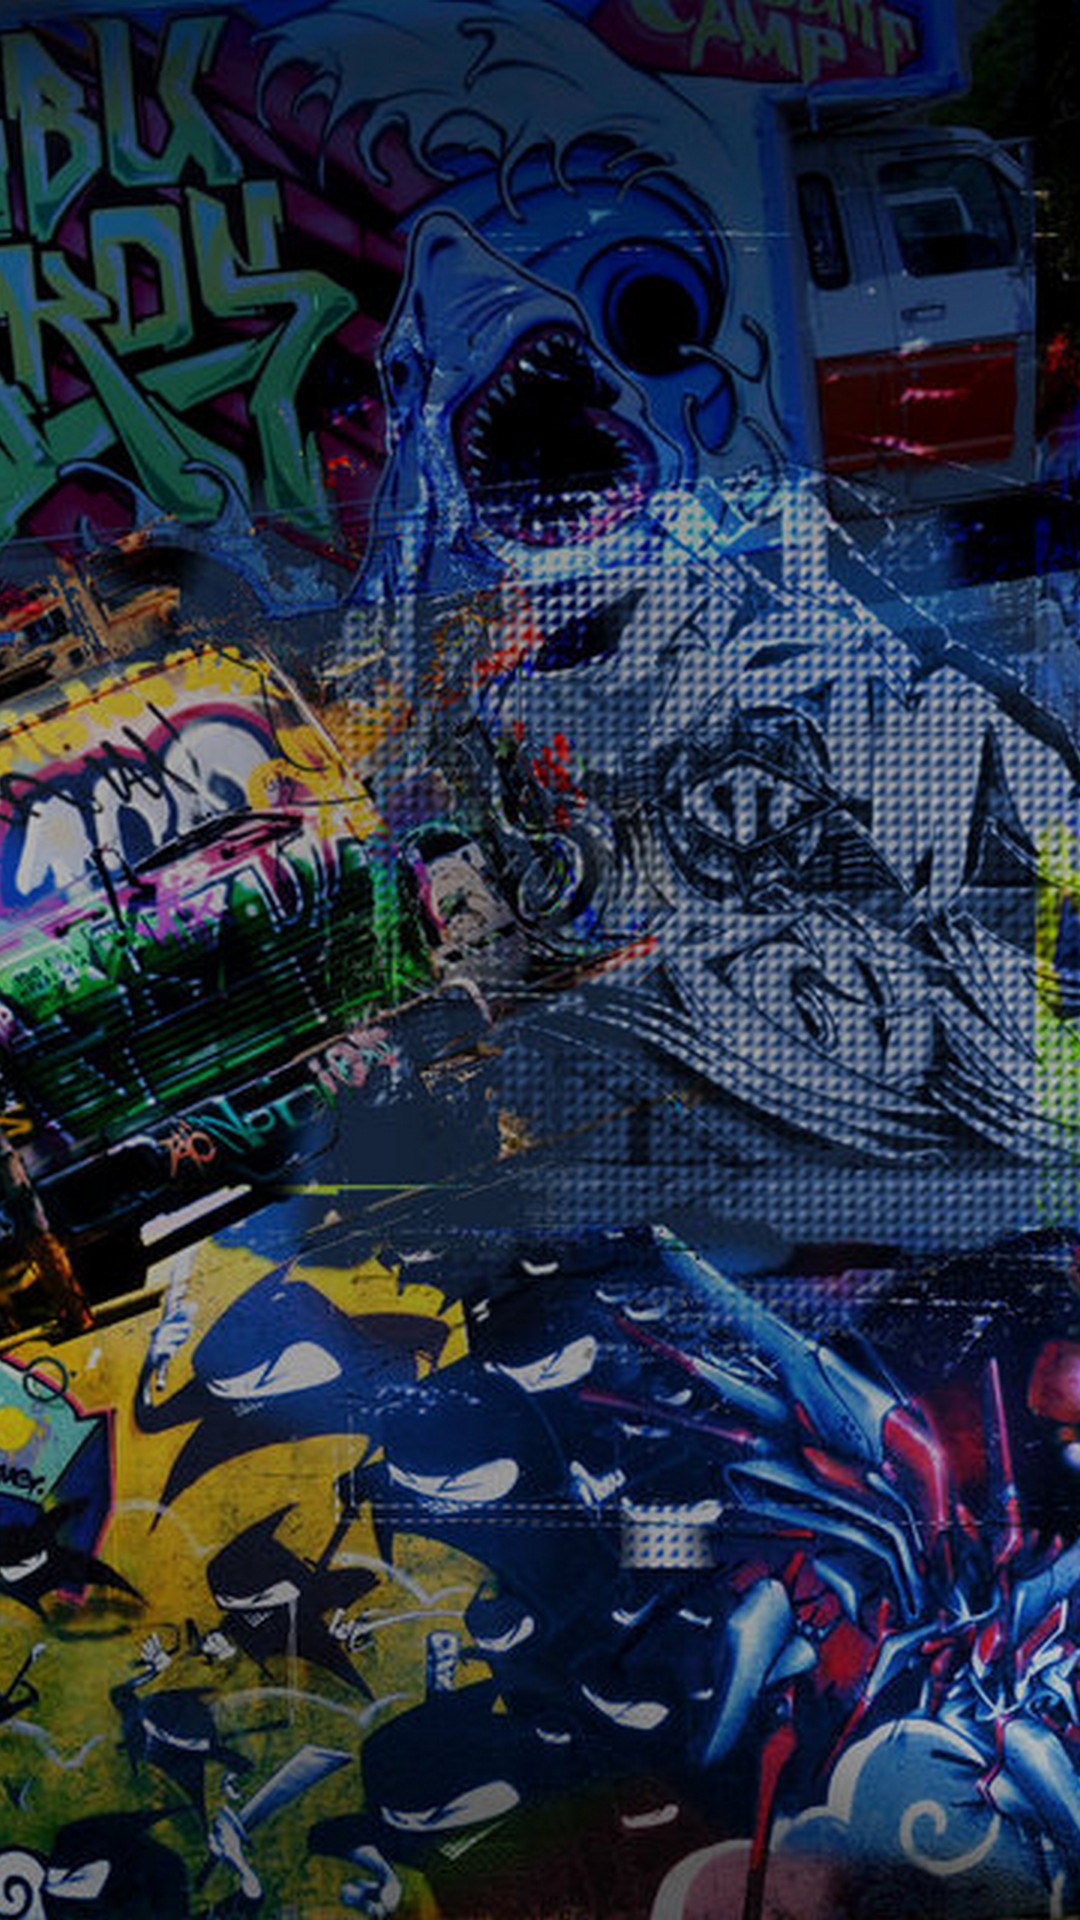 Graffiti Tag Wallpaper For Android with image resolution 1080x1920 pixel. You can make this wallpaper for your Android backgrounds, Tablet, Smartphones Screensavers and Mobile Phone Lock Screen